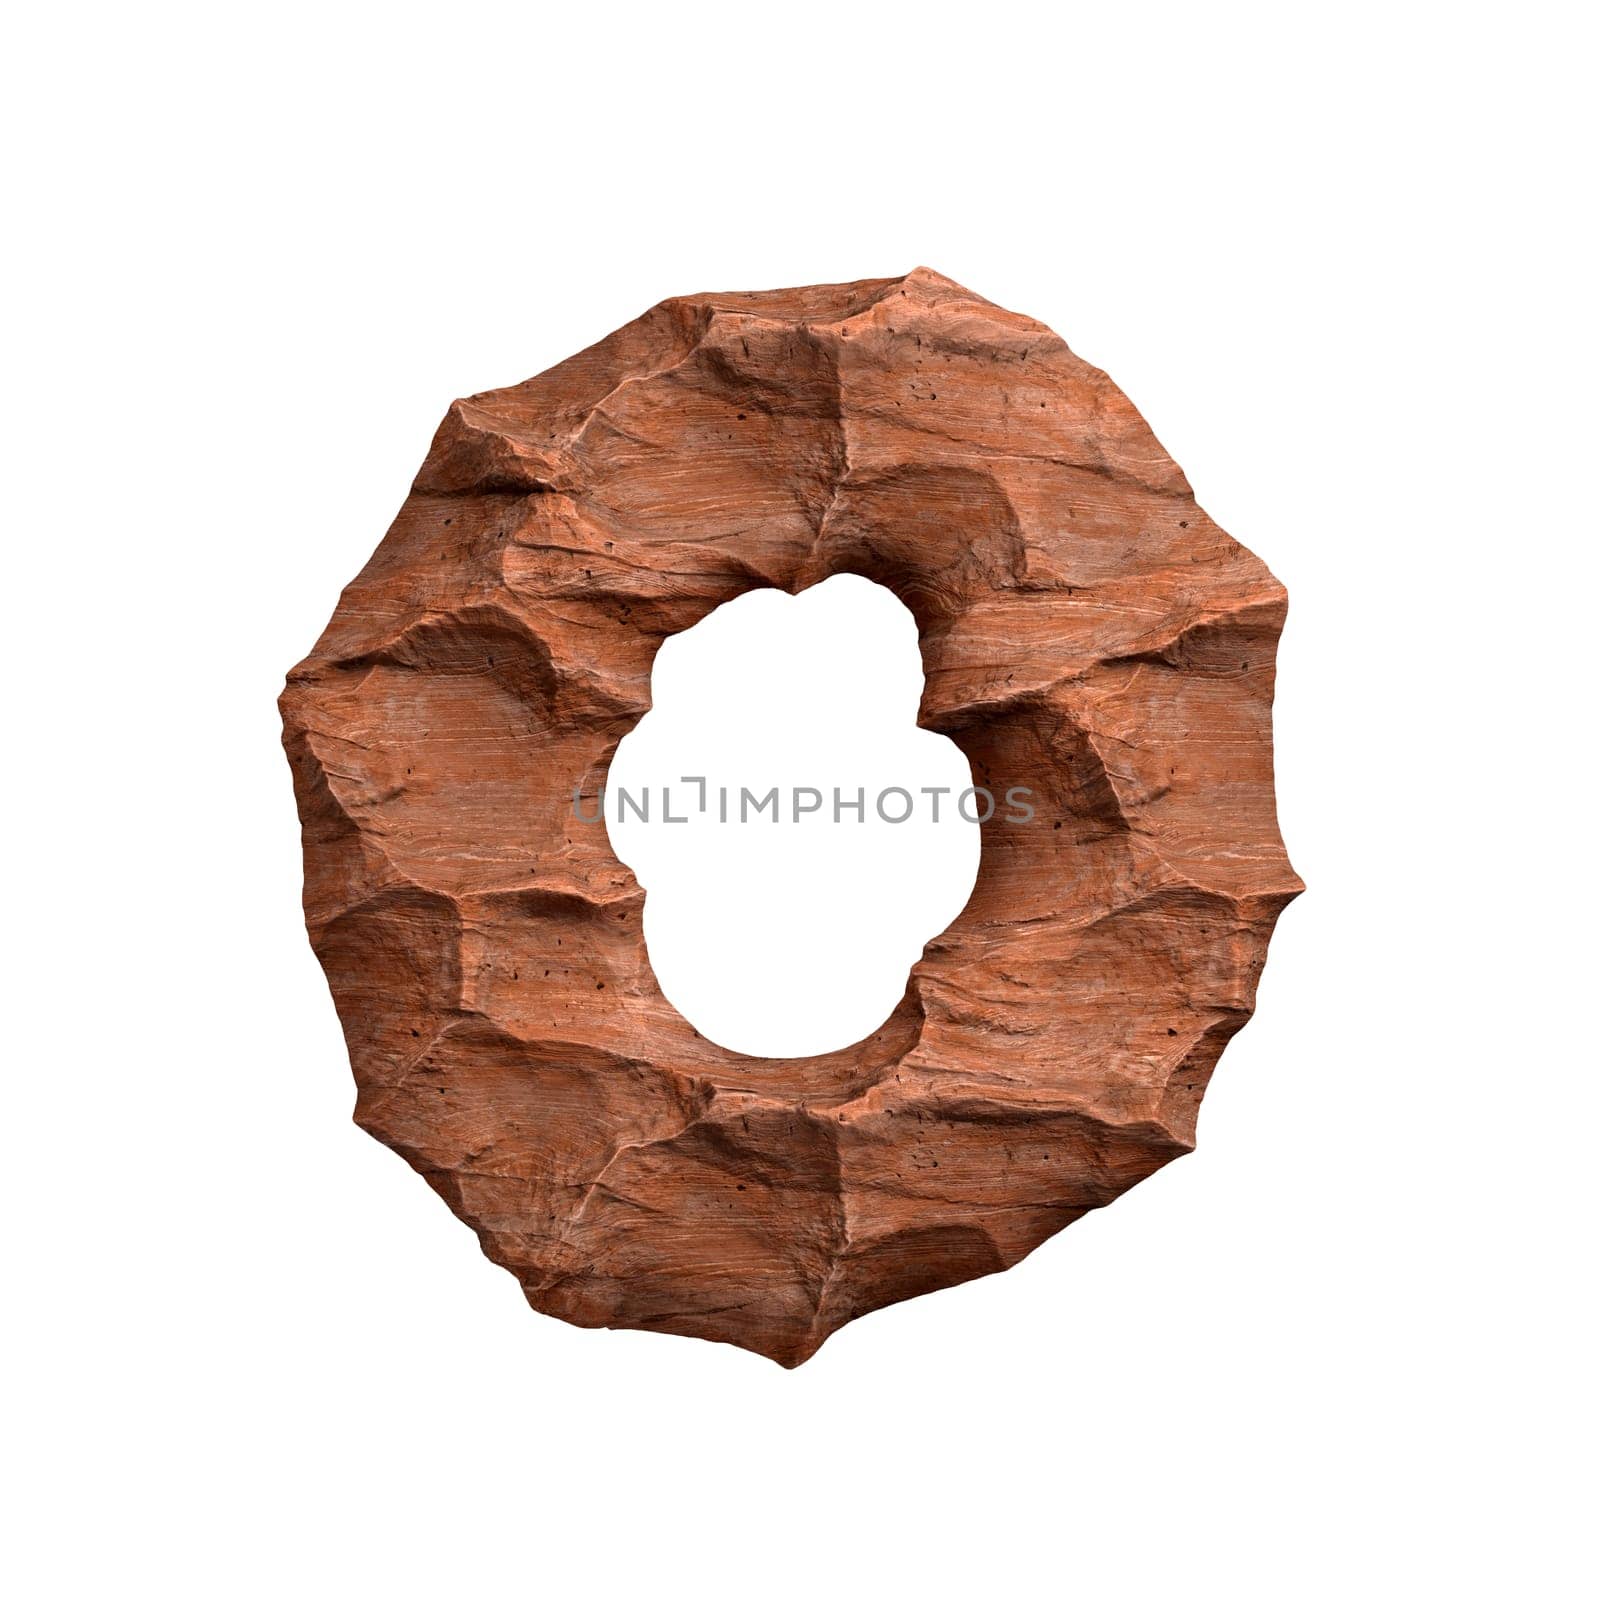 Desert sandstone letter O - Large 3d red rock font - suitable for Arizona, geology or desert related subjects by chrisroll